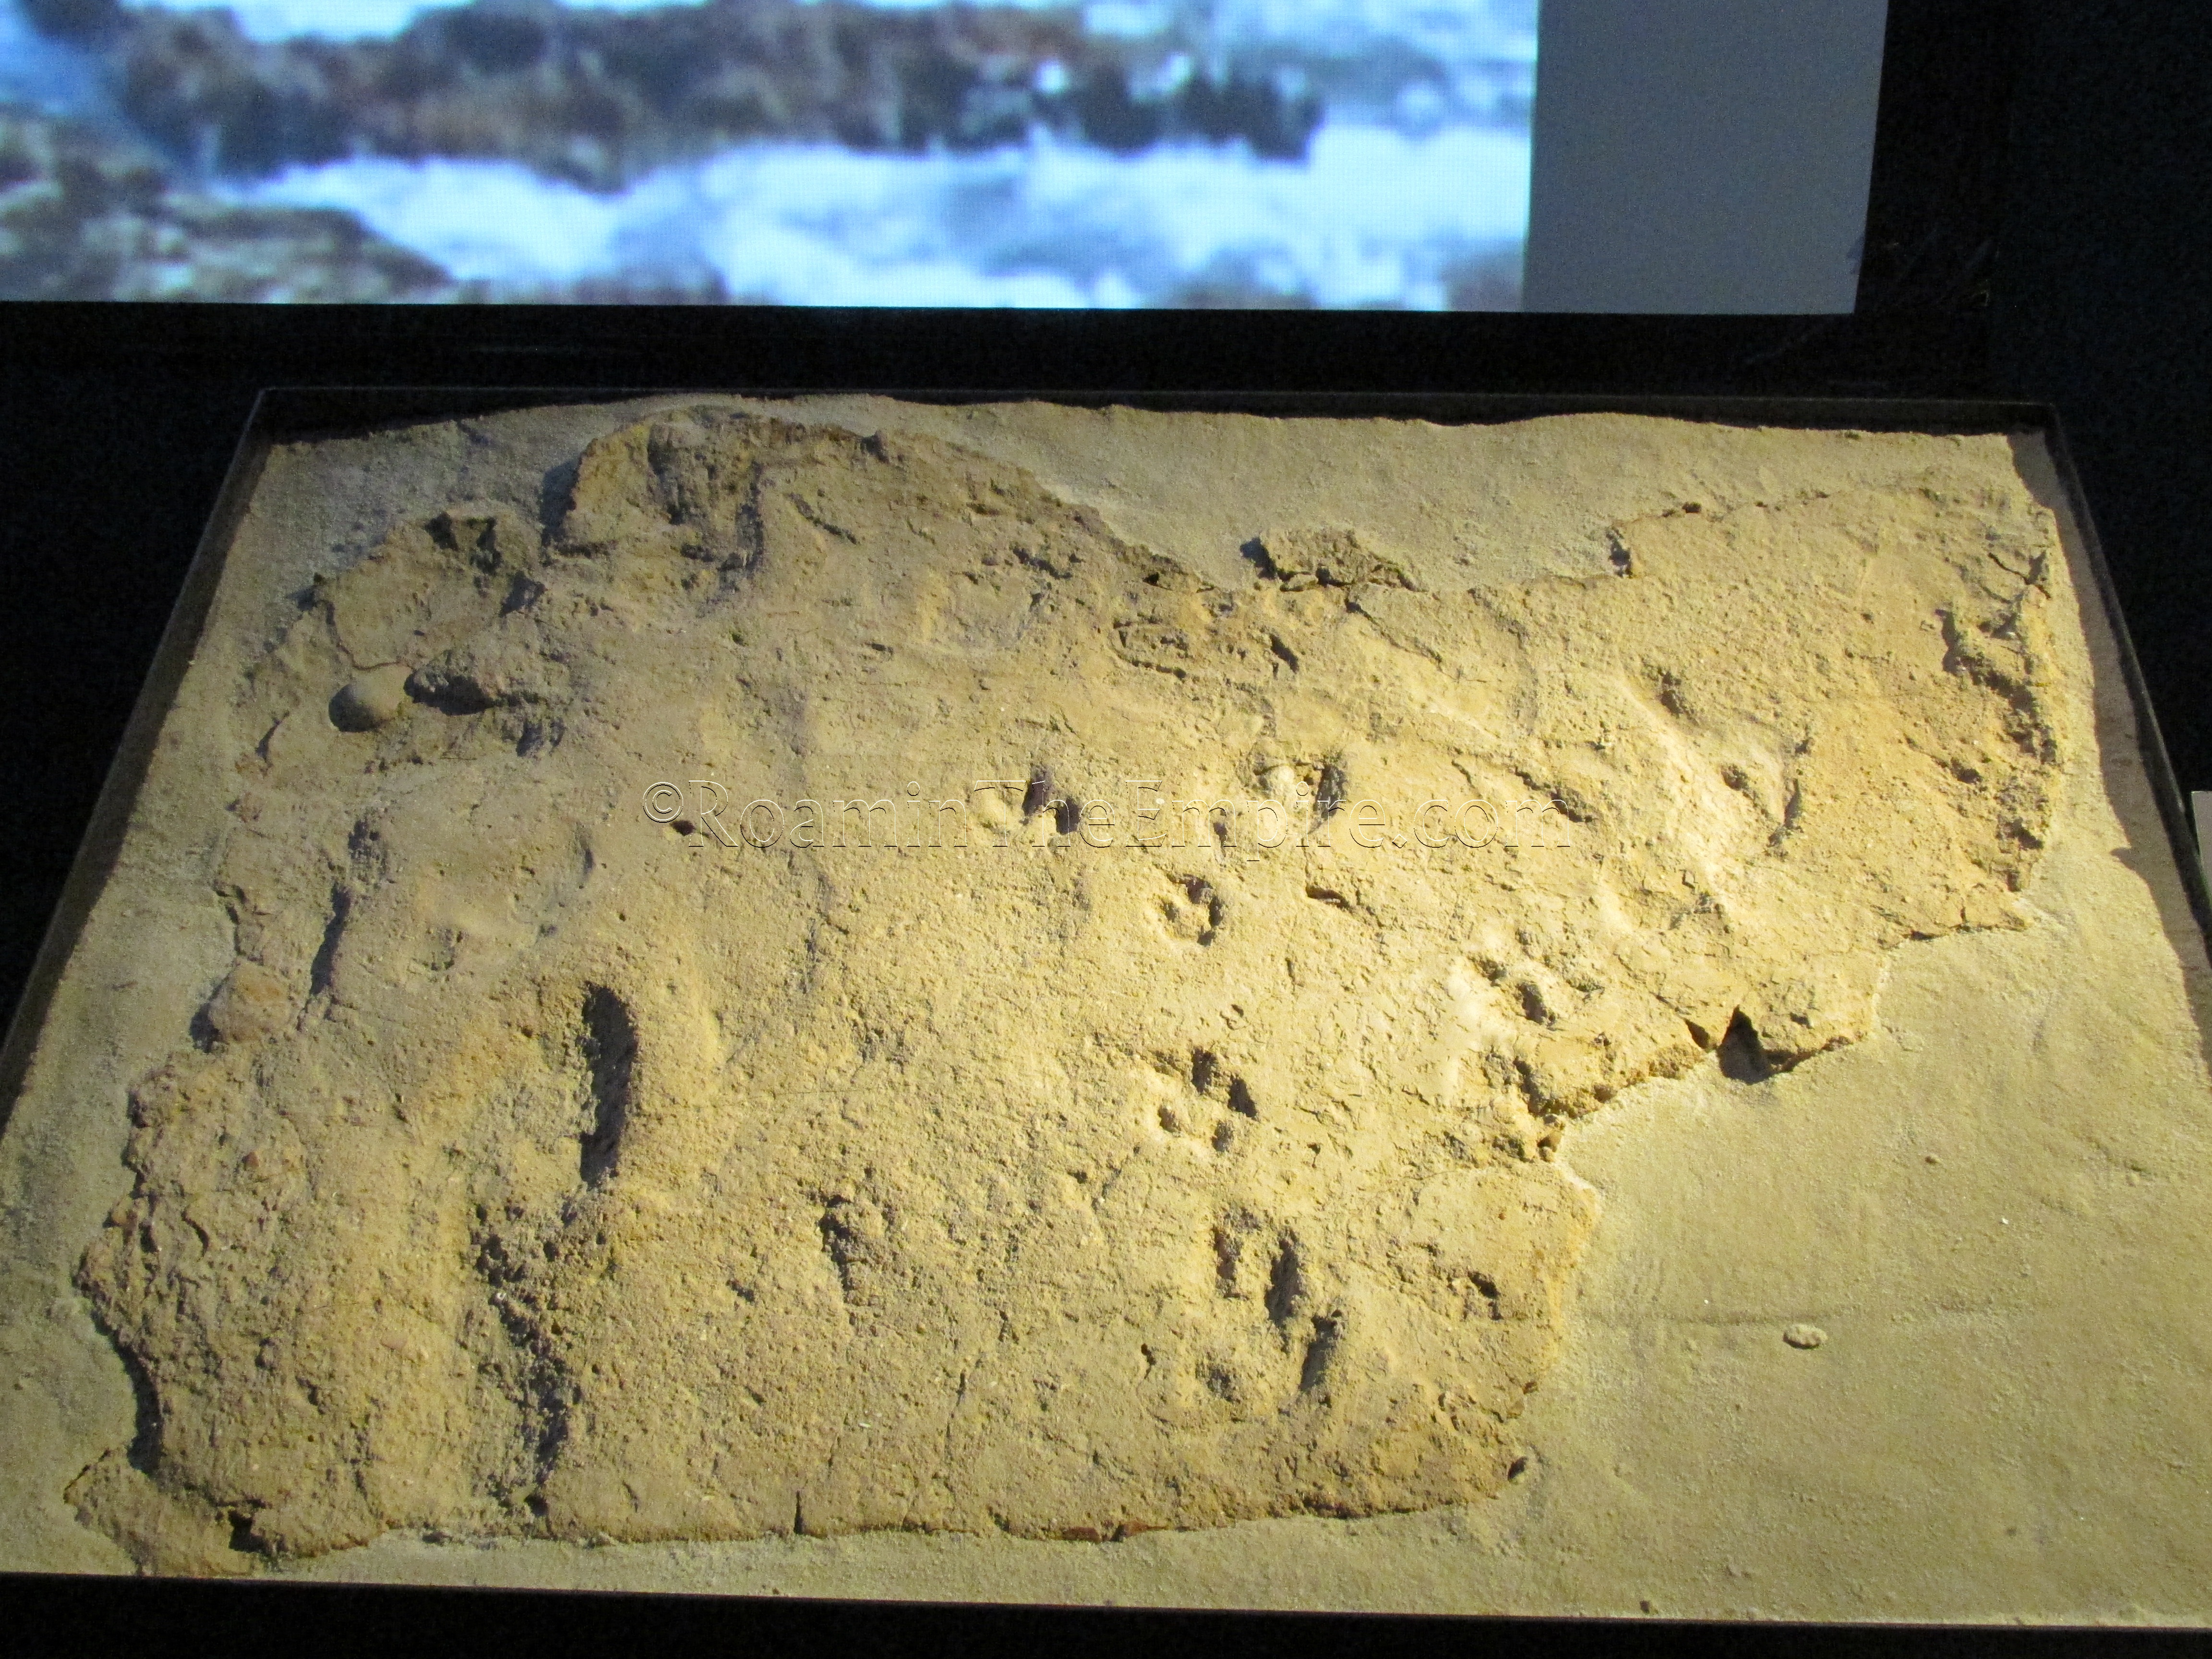 Human, goat, and dog footprints from the forum of Lucentum.